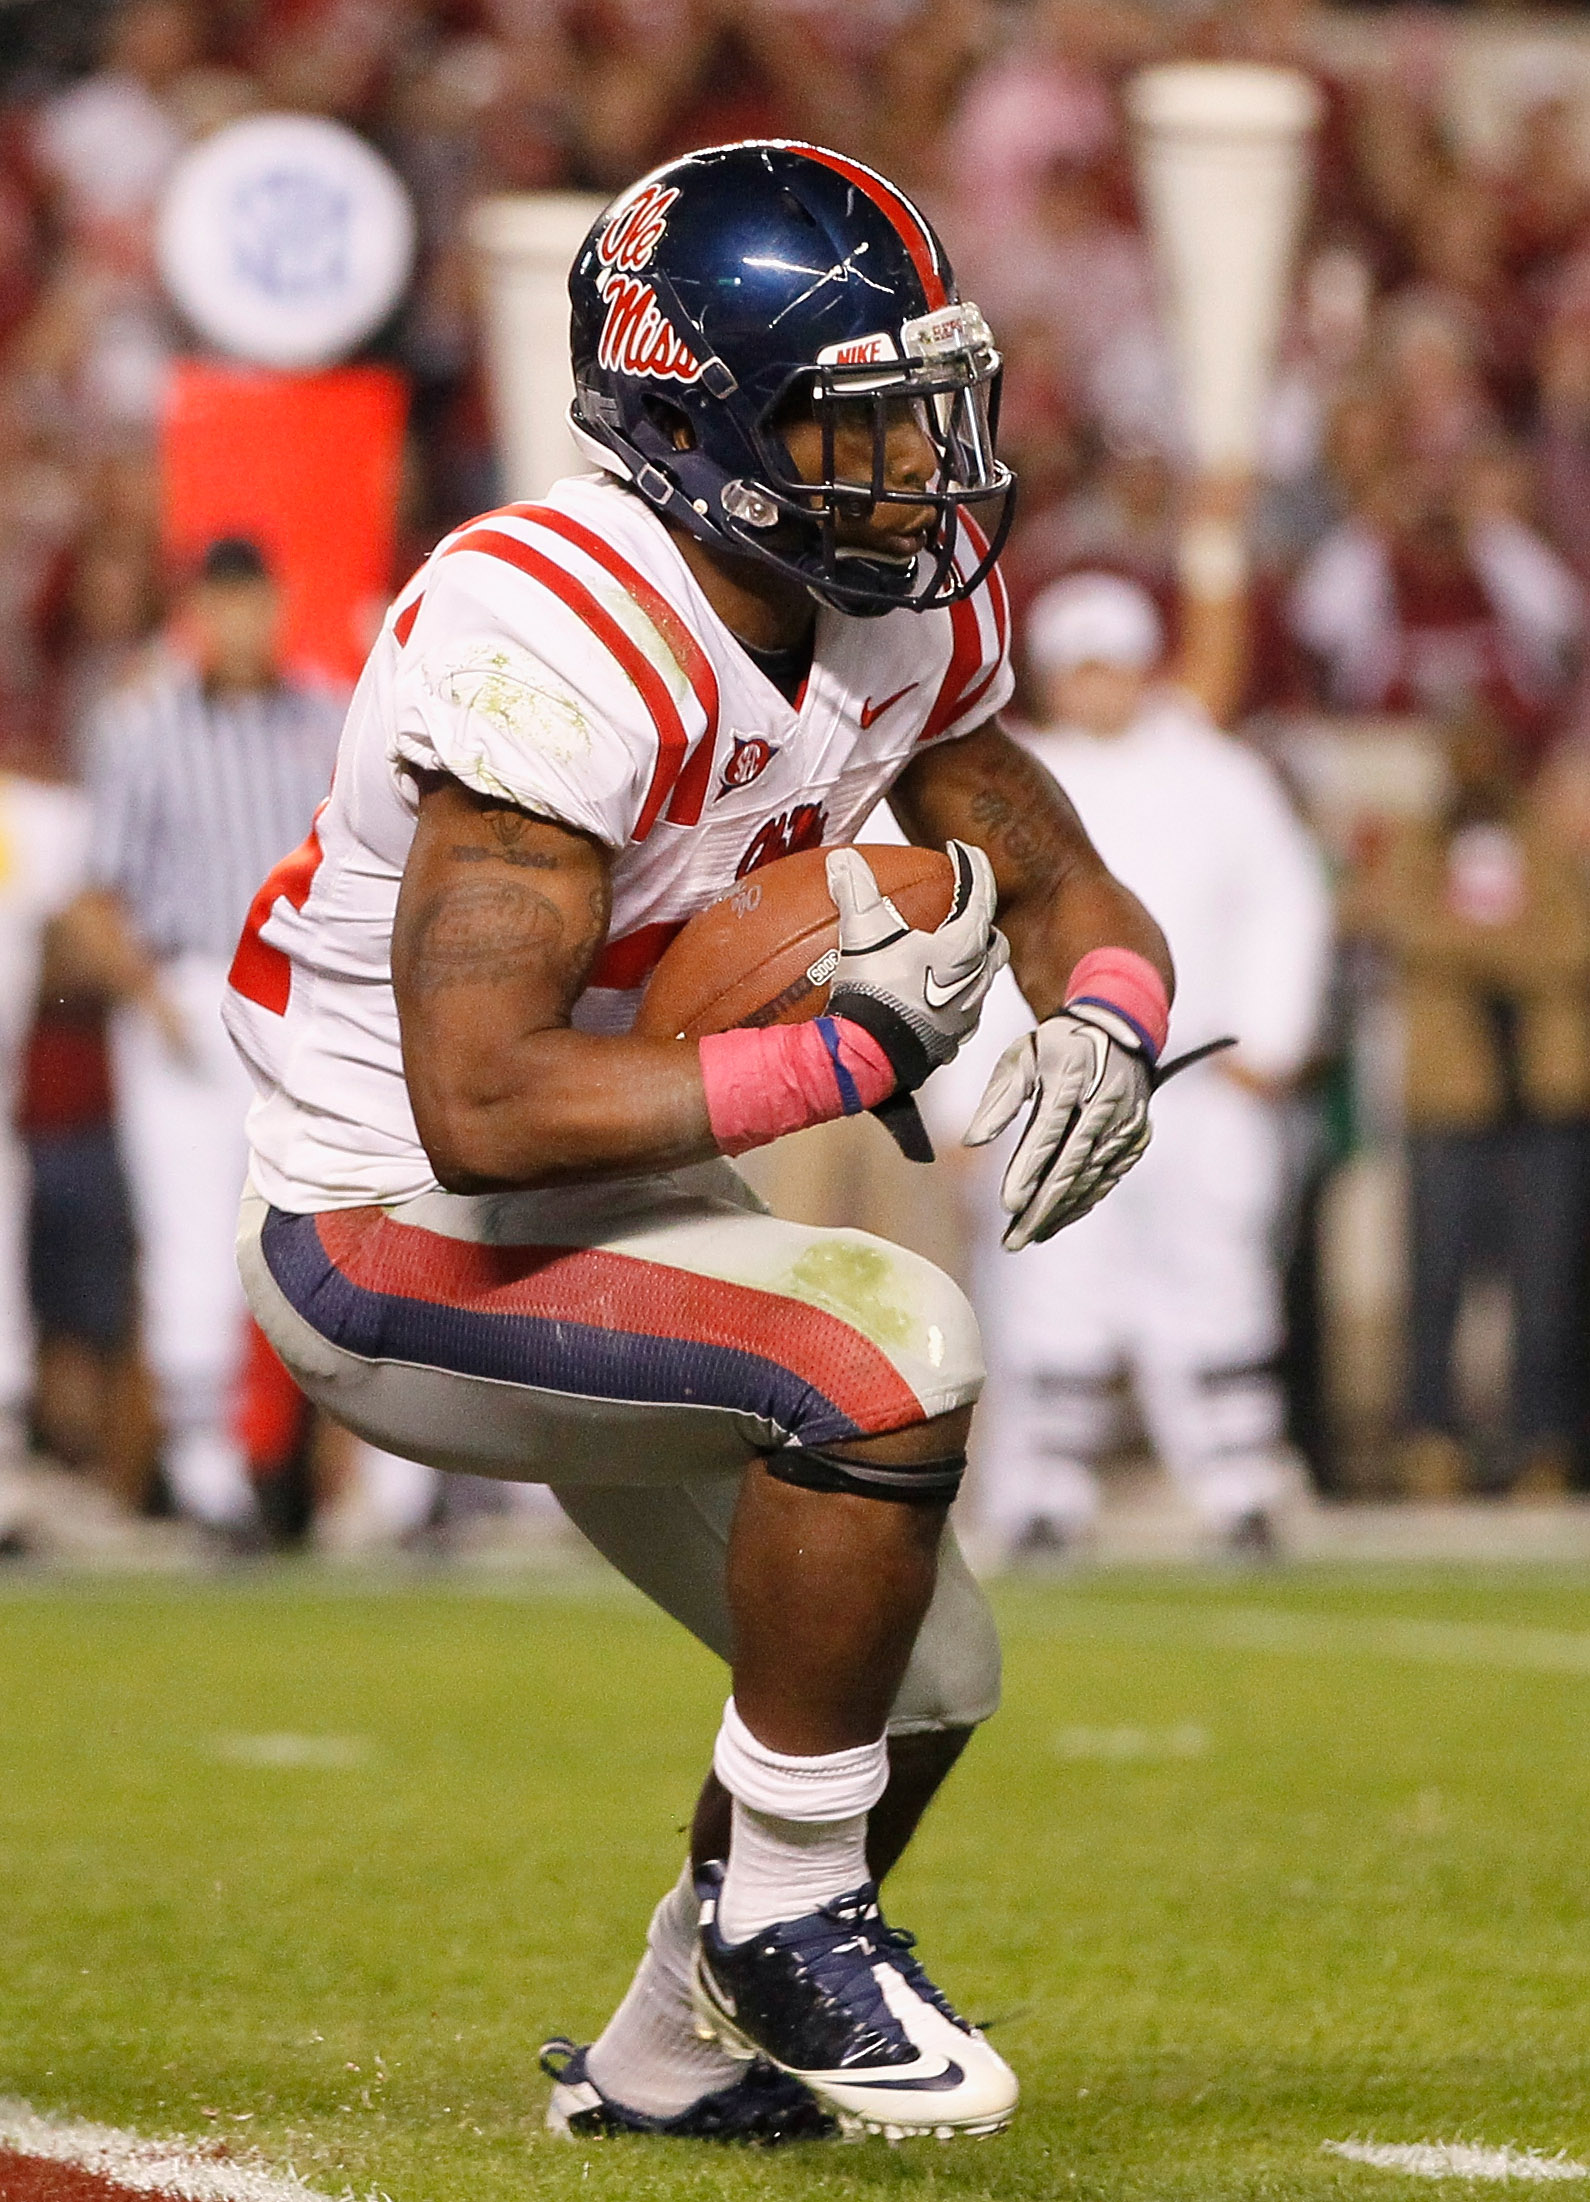 TUSCALOOSA, AL - OCTOBER 16:  Brandon Bolden #34 of the Ole Miss Rebels against the Alabama Crimson Tide at Bryant-Denny Stadium on October 16, 2010 in Tuscaloosa, Alabama.  (Photo by Kevin C. Cox/Getty Images)